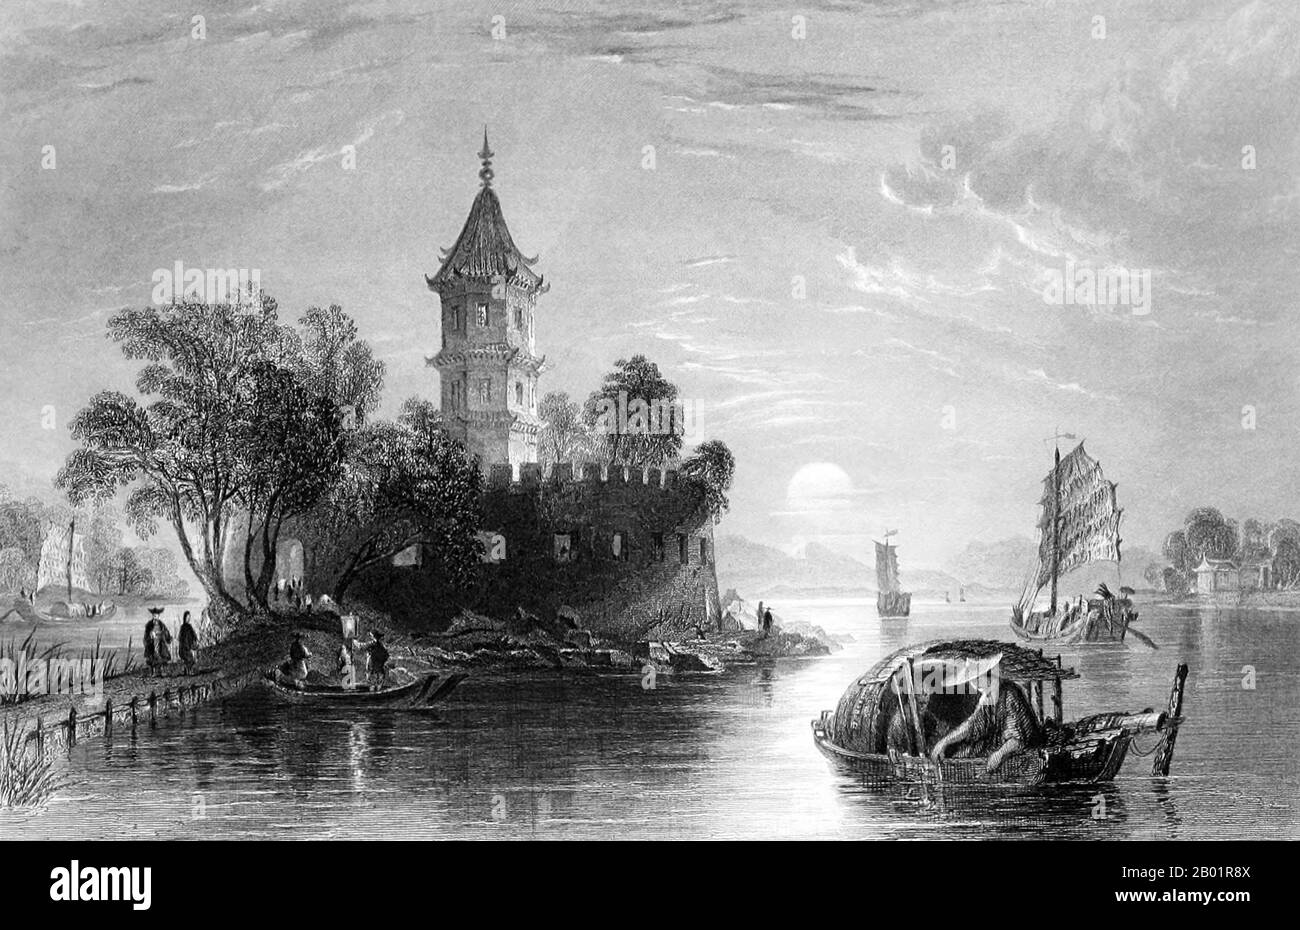 China/United Kingdom: 'The Tai-wang-kow, or Yellow Pagoda Fort, Canton River'. Engraving by Thomas Allom (13 March 1804 - 21 October 1872), 1841.  The First Anglo-Chinese War (1839-1842), known popularly as the First Opium War or simply the Opium War, was fought between the United Kingdom and the Qing Dynasty of China over their conflicting viewpoints on diplomatic relations, trade and the administration of justice.  Chinese officials wished to stop what was perceived as an outflow of silver and to control the spread of opium, and confiscated supplies of opium from British traders. Stock Photo